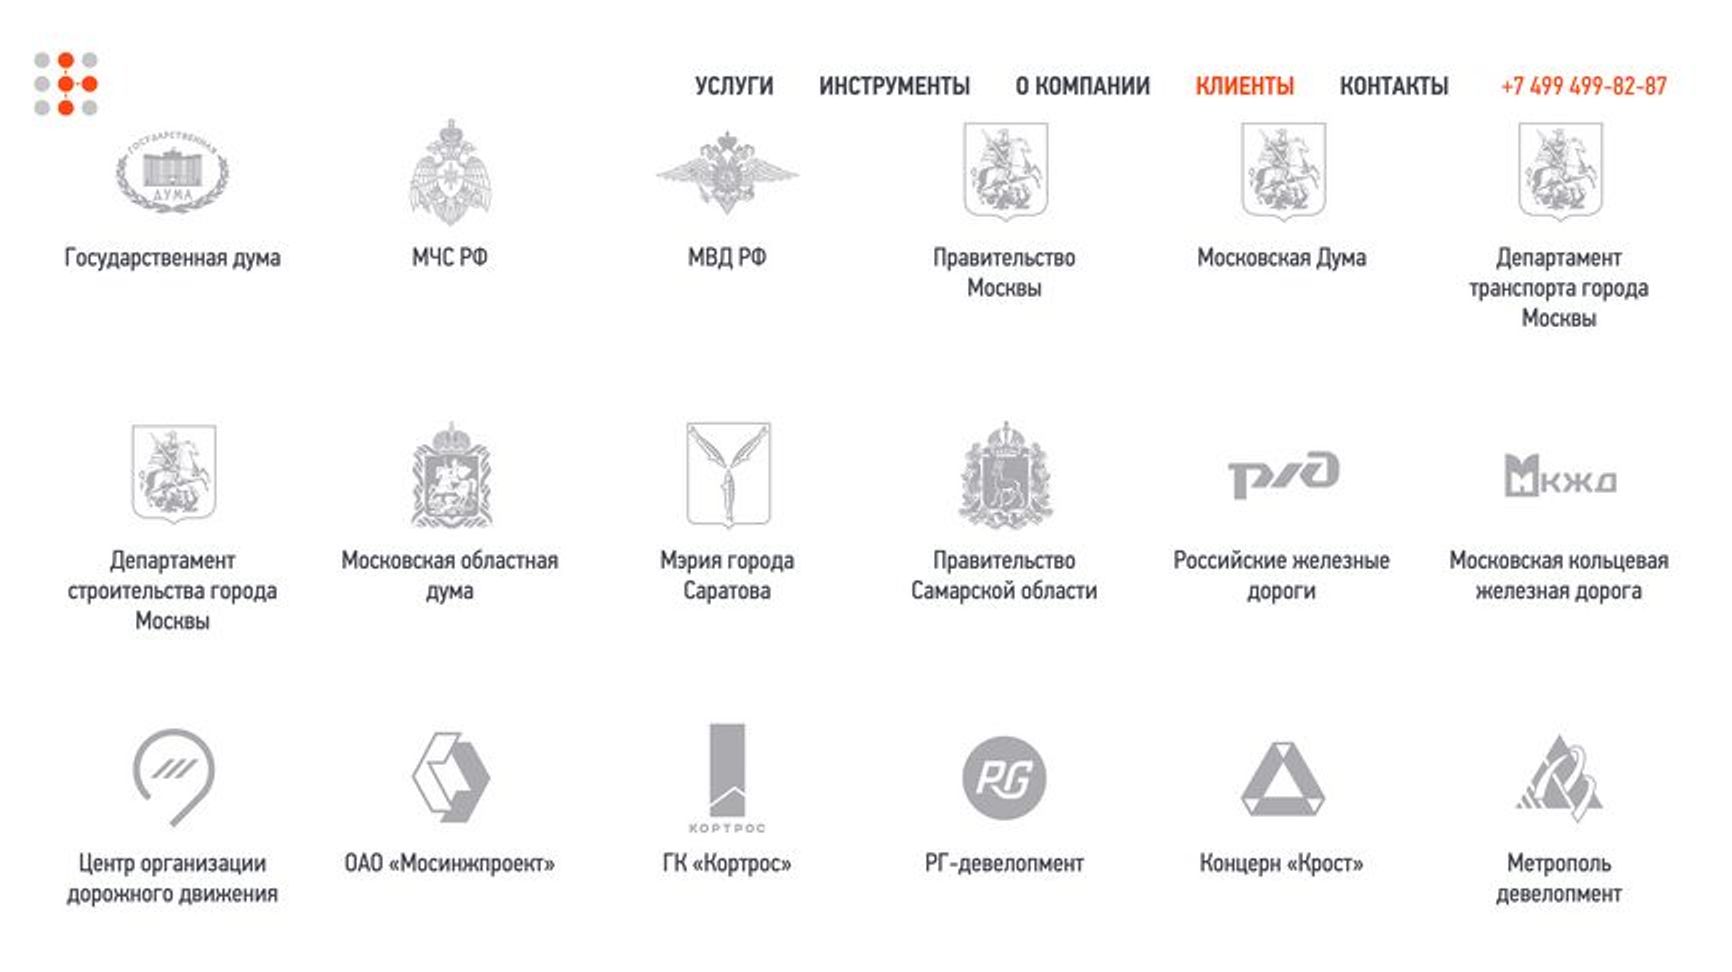 The company has its client list out in the open — the first four on the list are Russia's State Duma, Ministry of Emergency Situations, Ministry of Internal Affairs, and the Government of Moscow